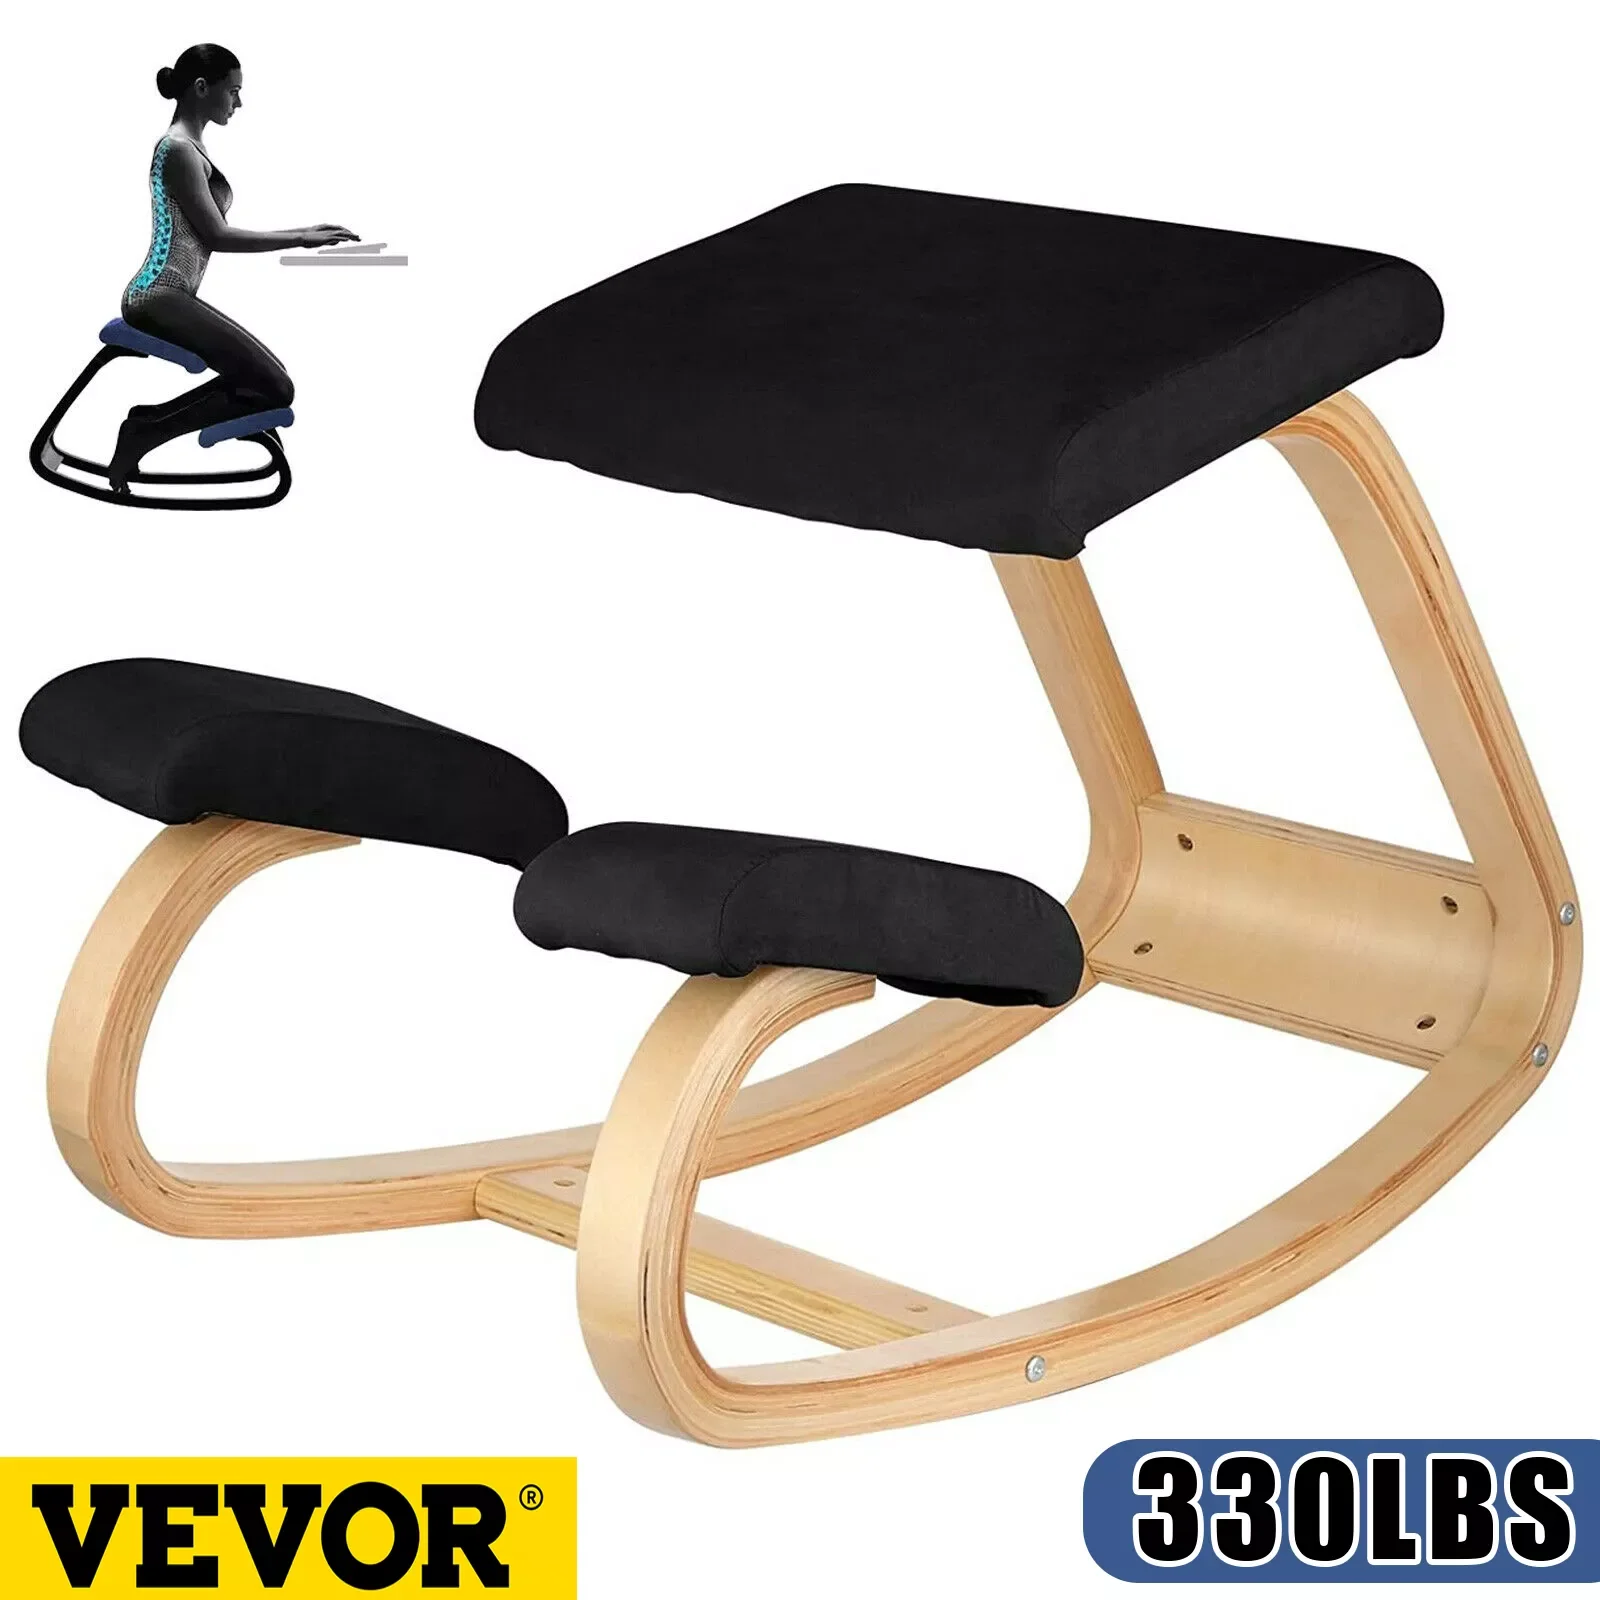 

VEVOR Ergonomic Kneeling Chair W/ Thick Cushion Rocking Wood Kneel Stool Improve Posture Relieve Knee Home Office Computer Chair